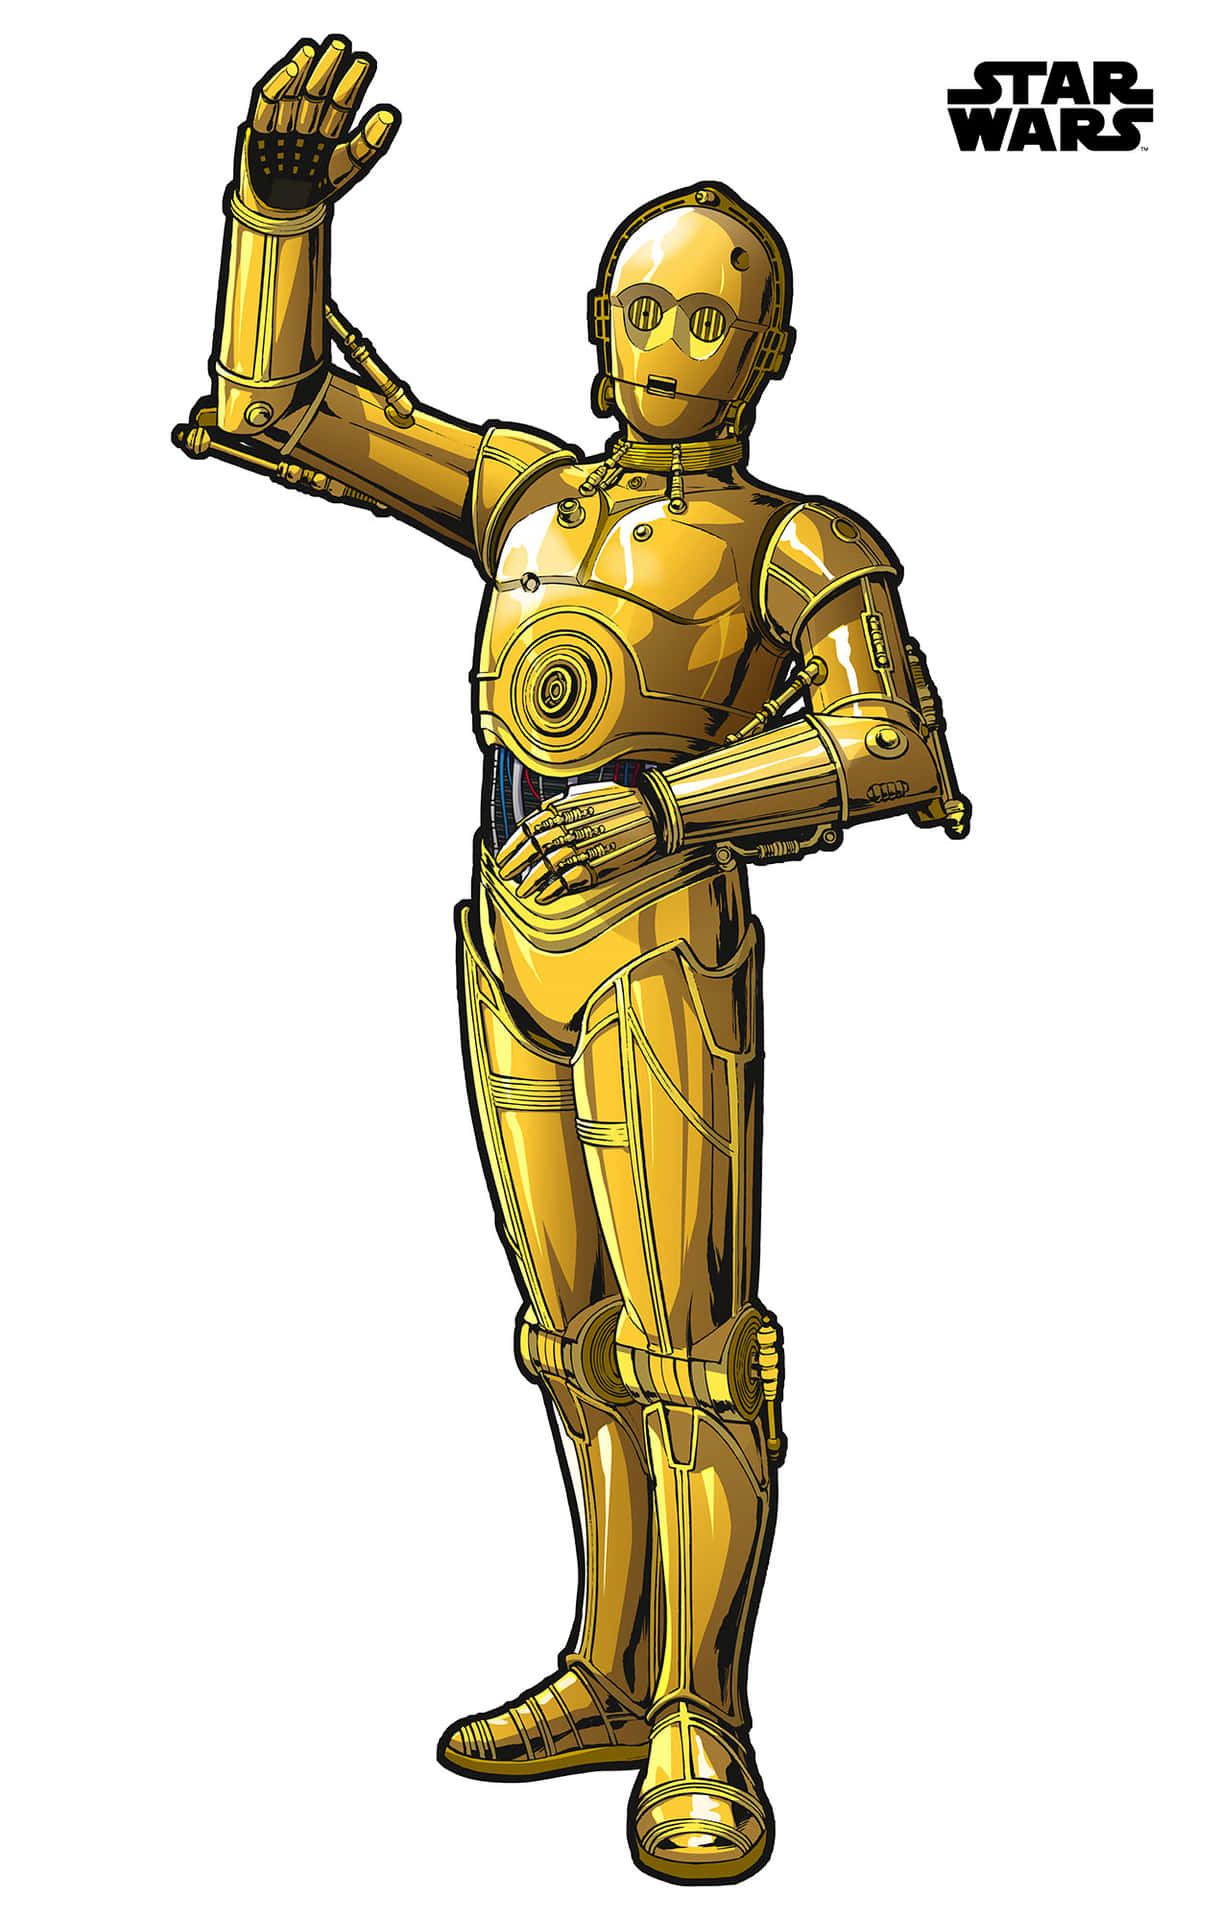 The iconic C-3PO from Star Wars against a galactic backdrop. Wallpaper